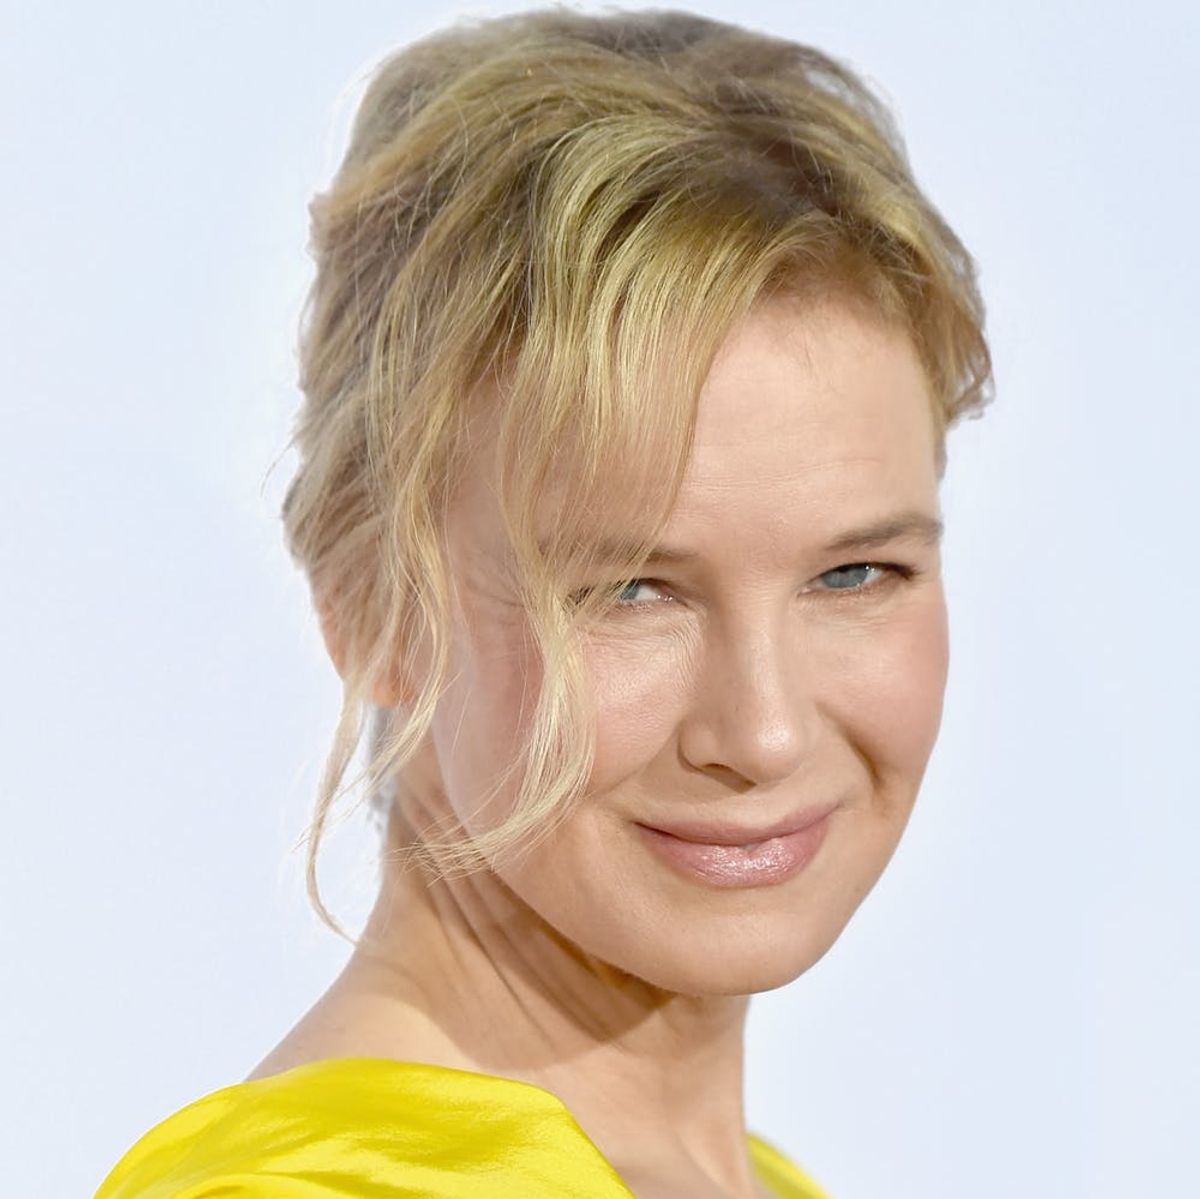 Here’s Your First Look at Renee Zellweger as Judy Garland in the ‘Judy’ Biopic